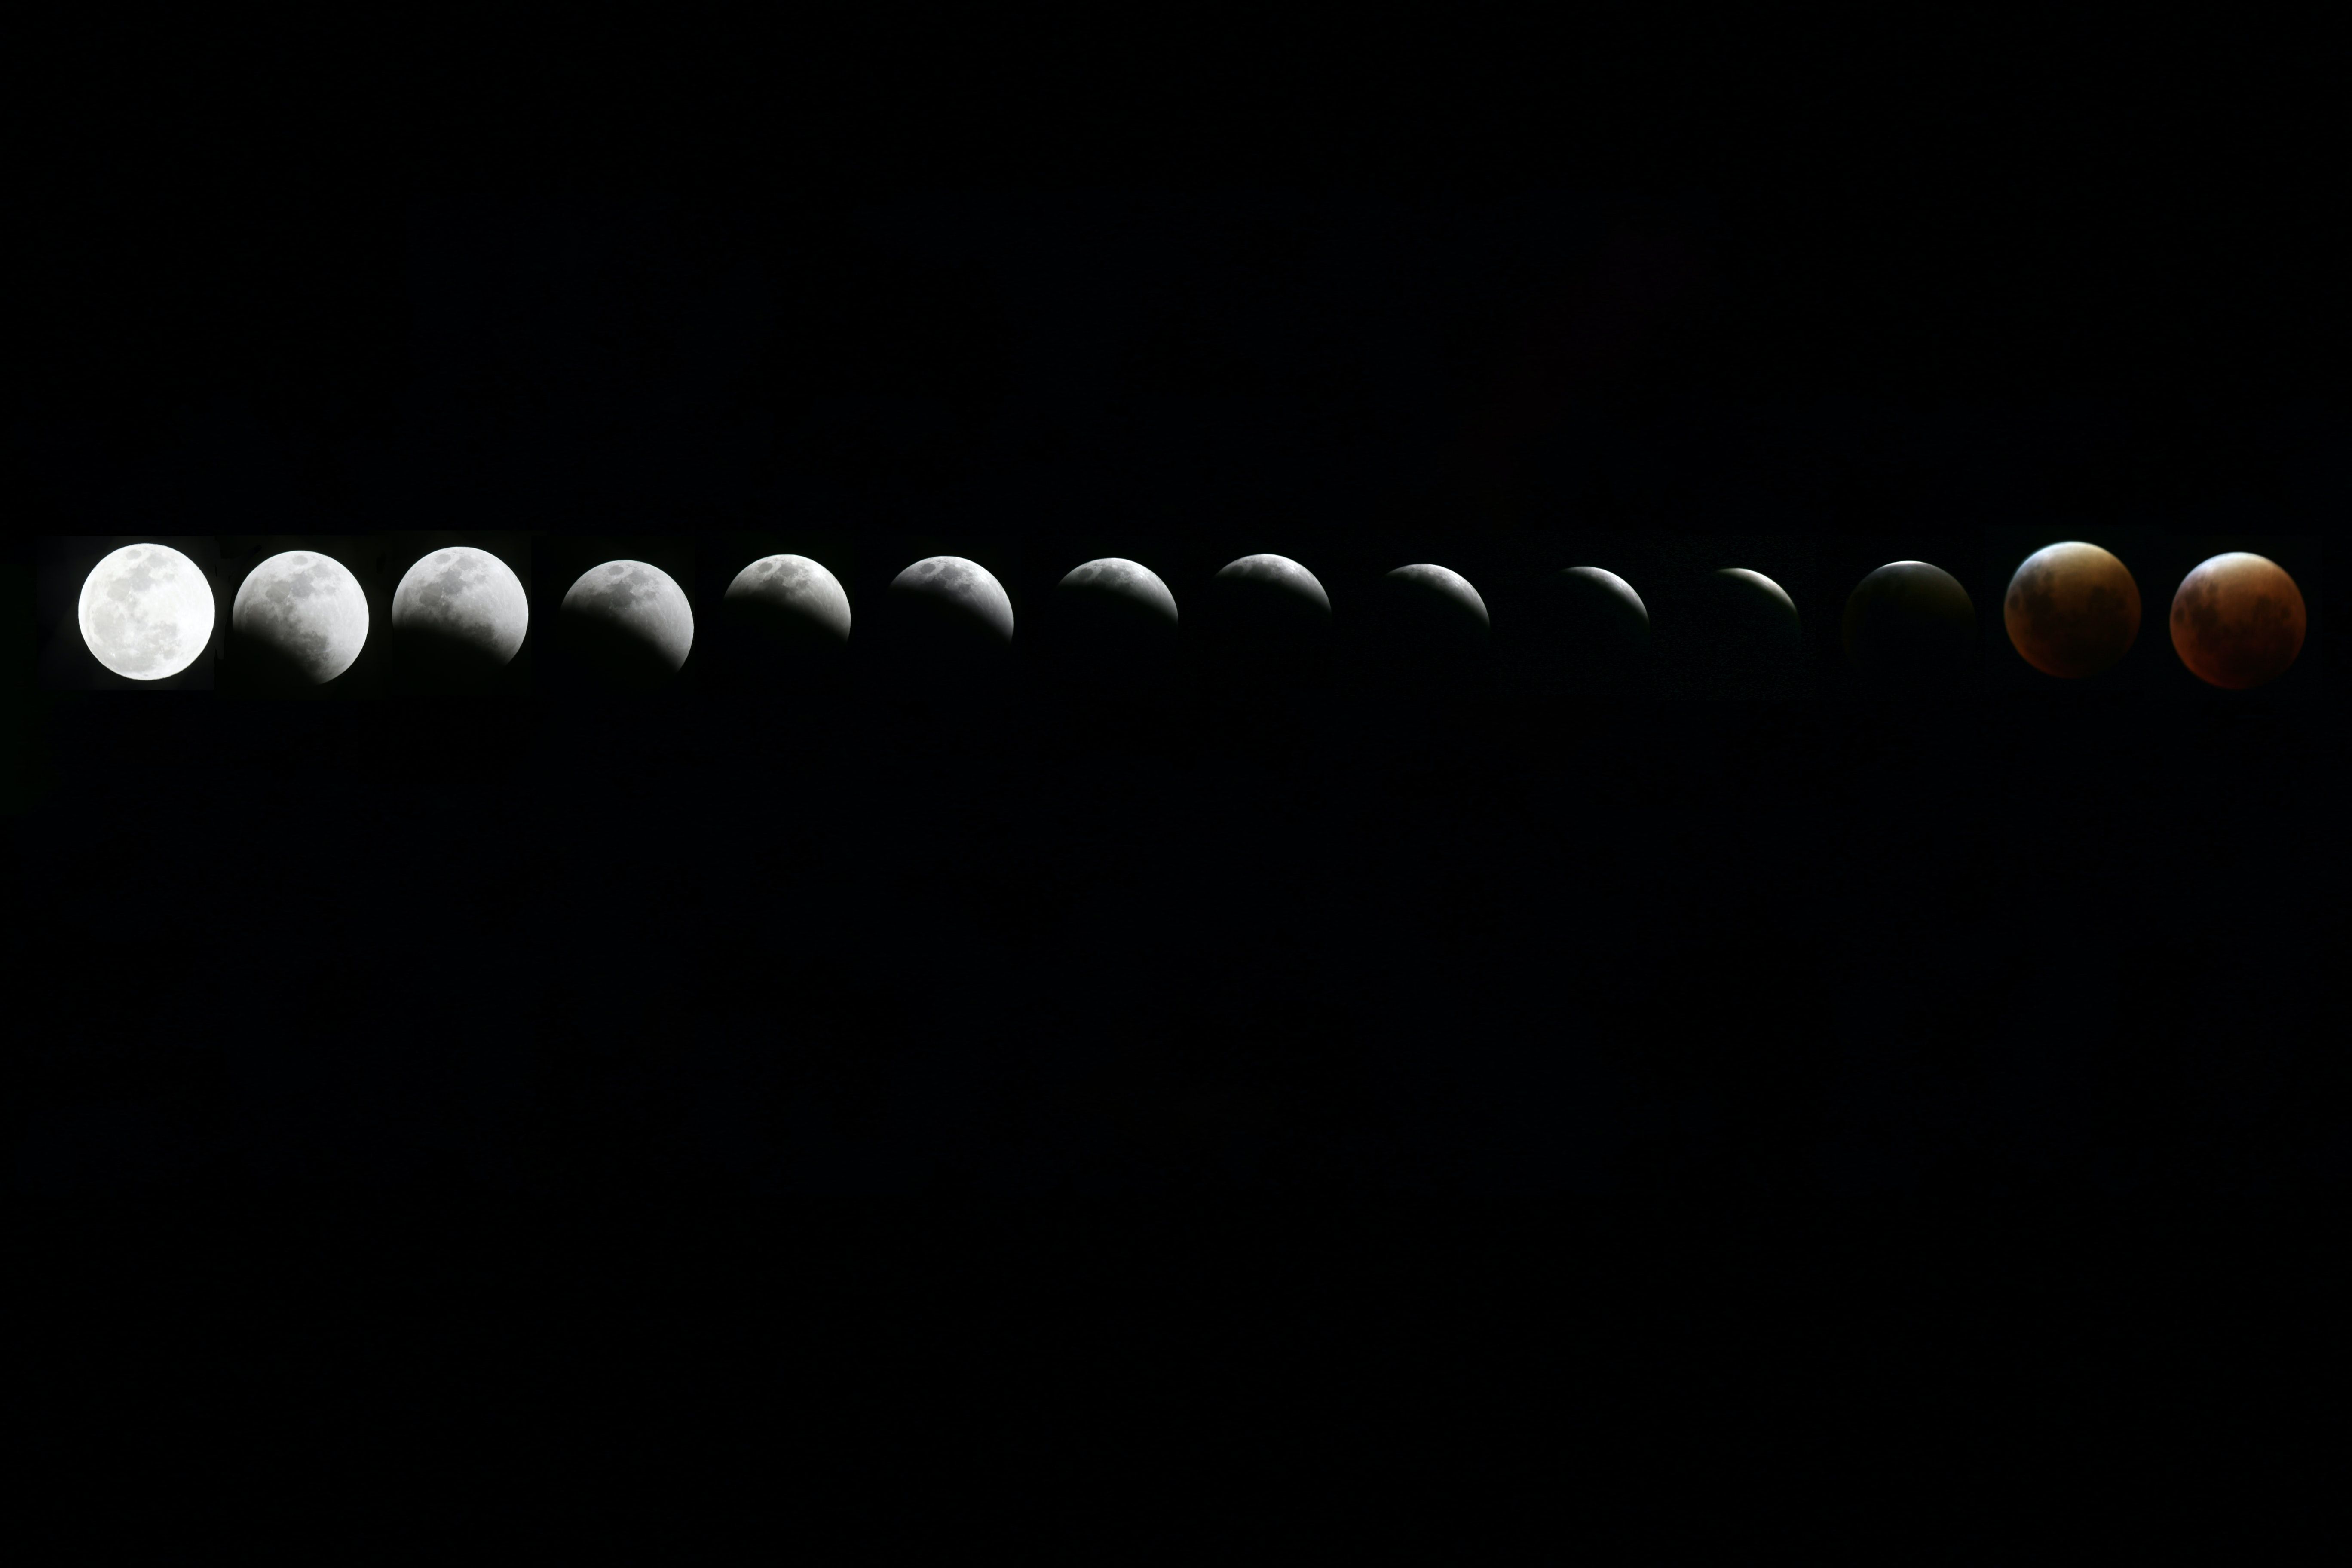 Phases Of The Moon Wallpaper